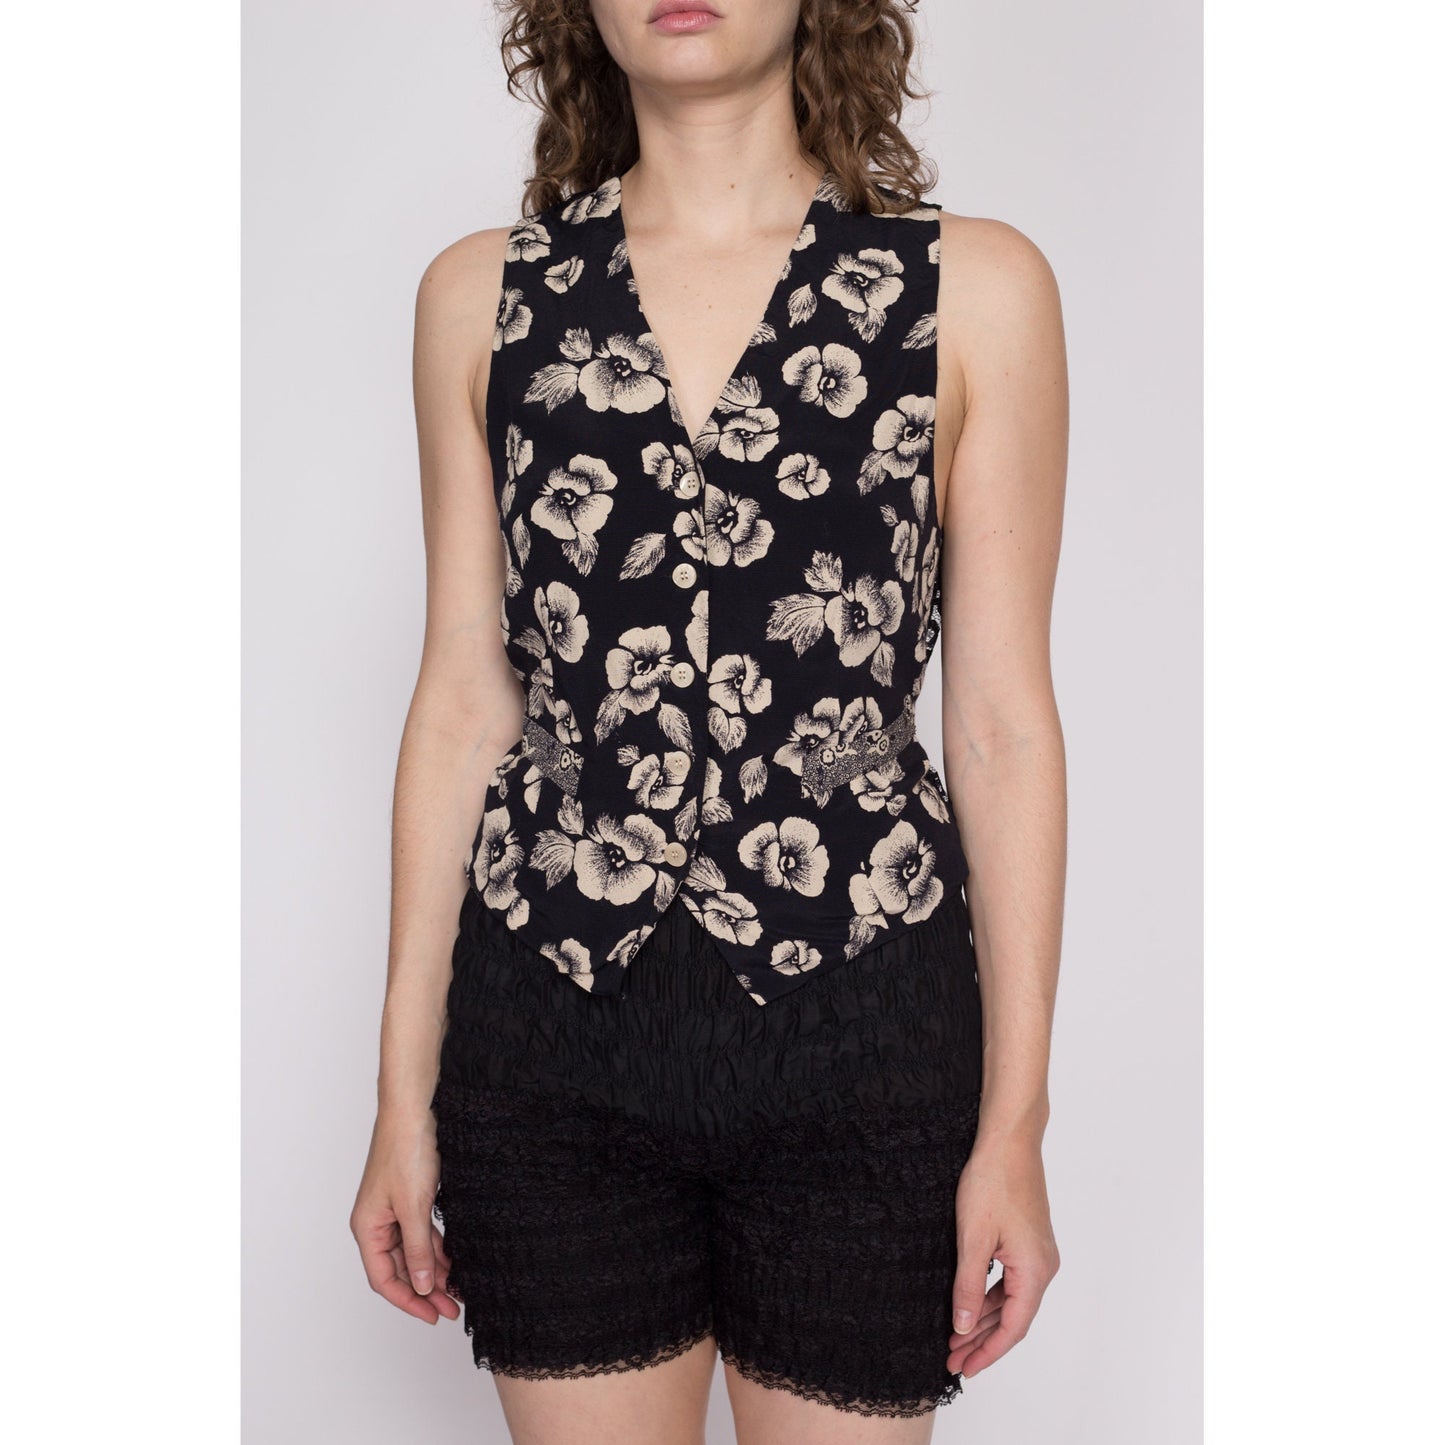 M| 90s The Limited Black Floral Crop Top Vest - Medium | Vintage Sheer Lace Back Button Up Cropped Sleeveless Suit Shirt